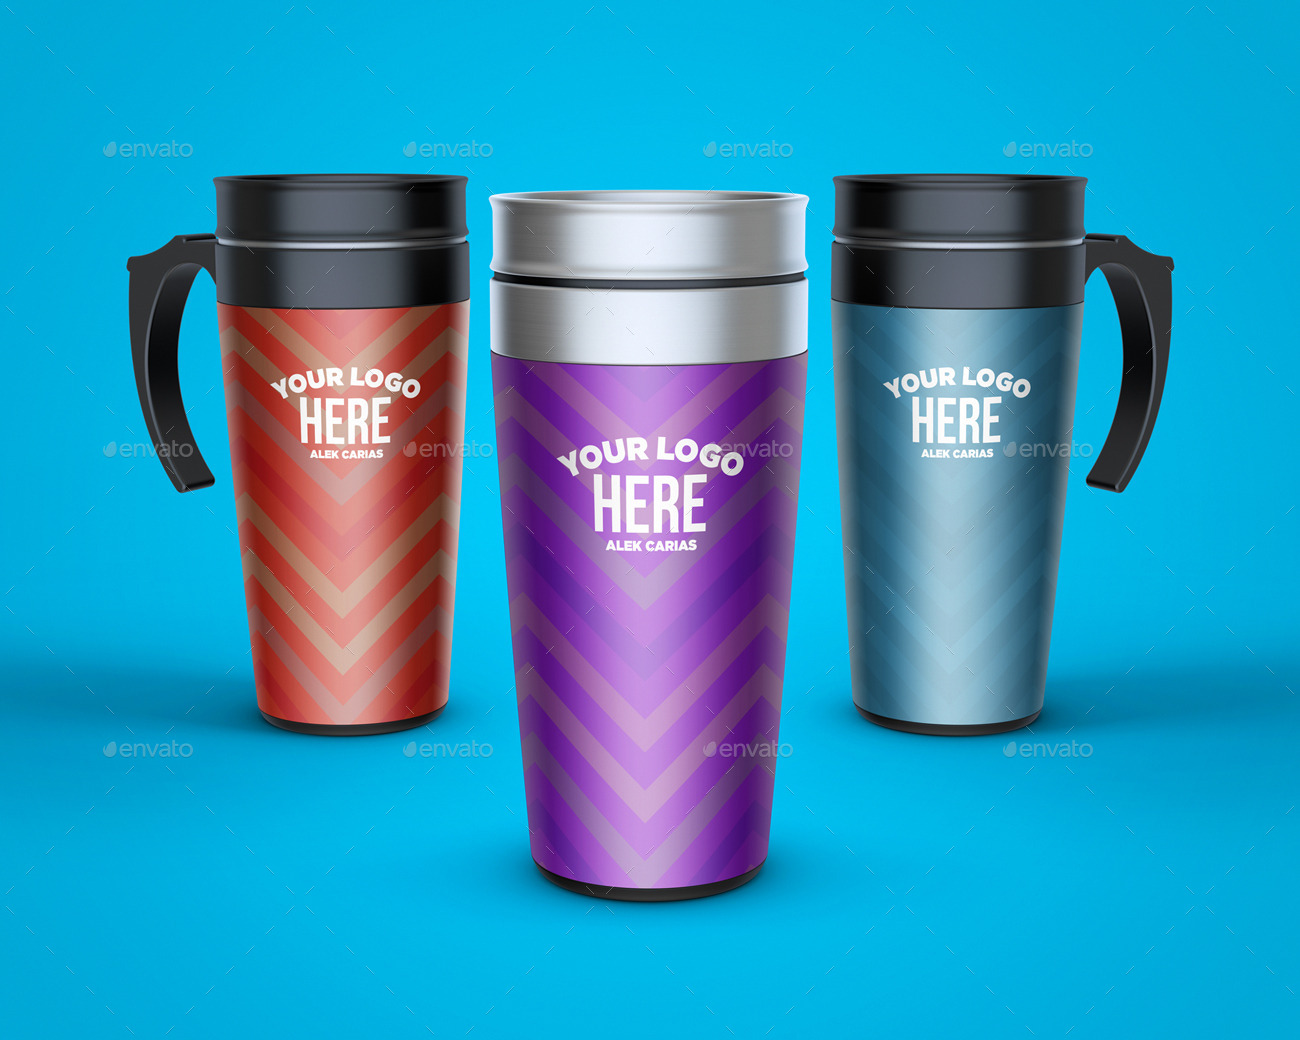 55 Free Awesome And Professional Psd Cup Mug Mockups For Designers And Premium Version Free Psd Templates